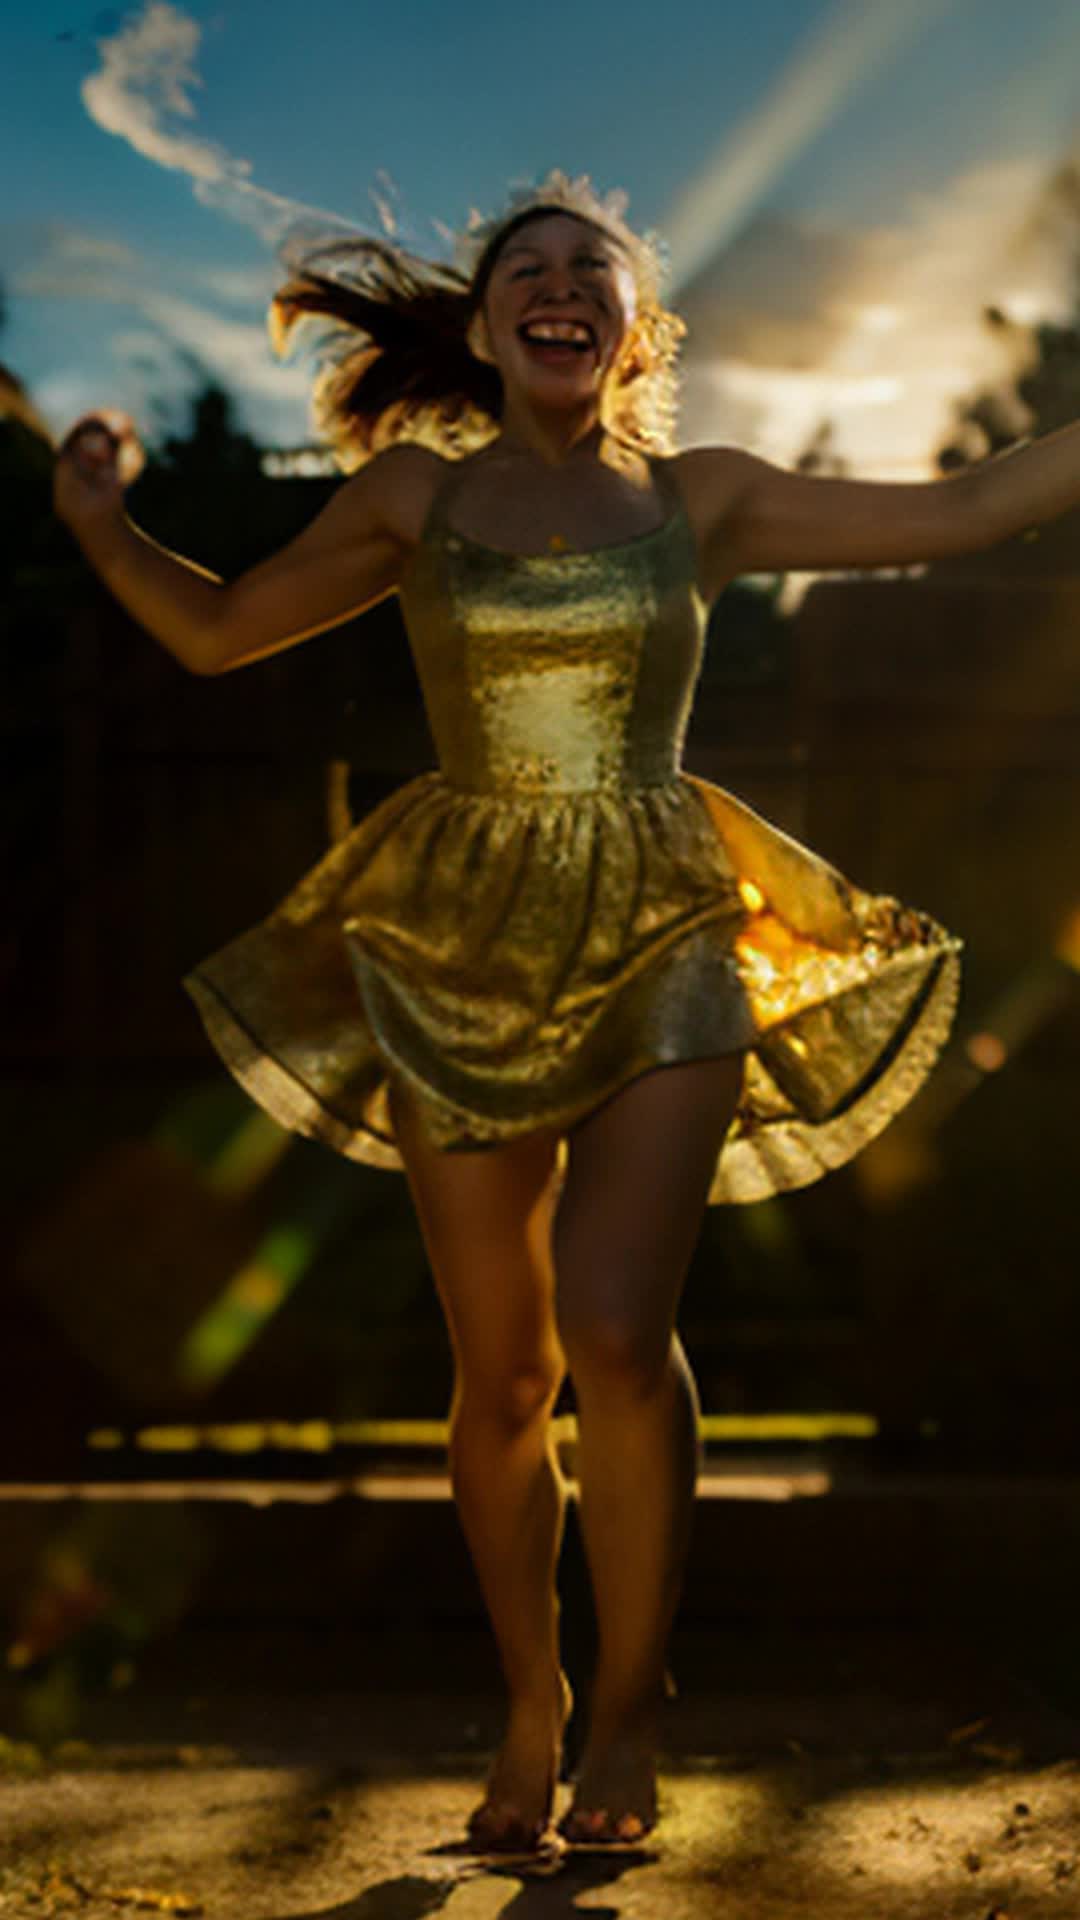 Shadow, darkness fading in story, Emily leap to her feet, triumphant grin, backyard transforms, magical victory aura, enchanted atmosphere, celebratory mood, crisp, clear sky, golden hour lighting